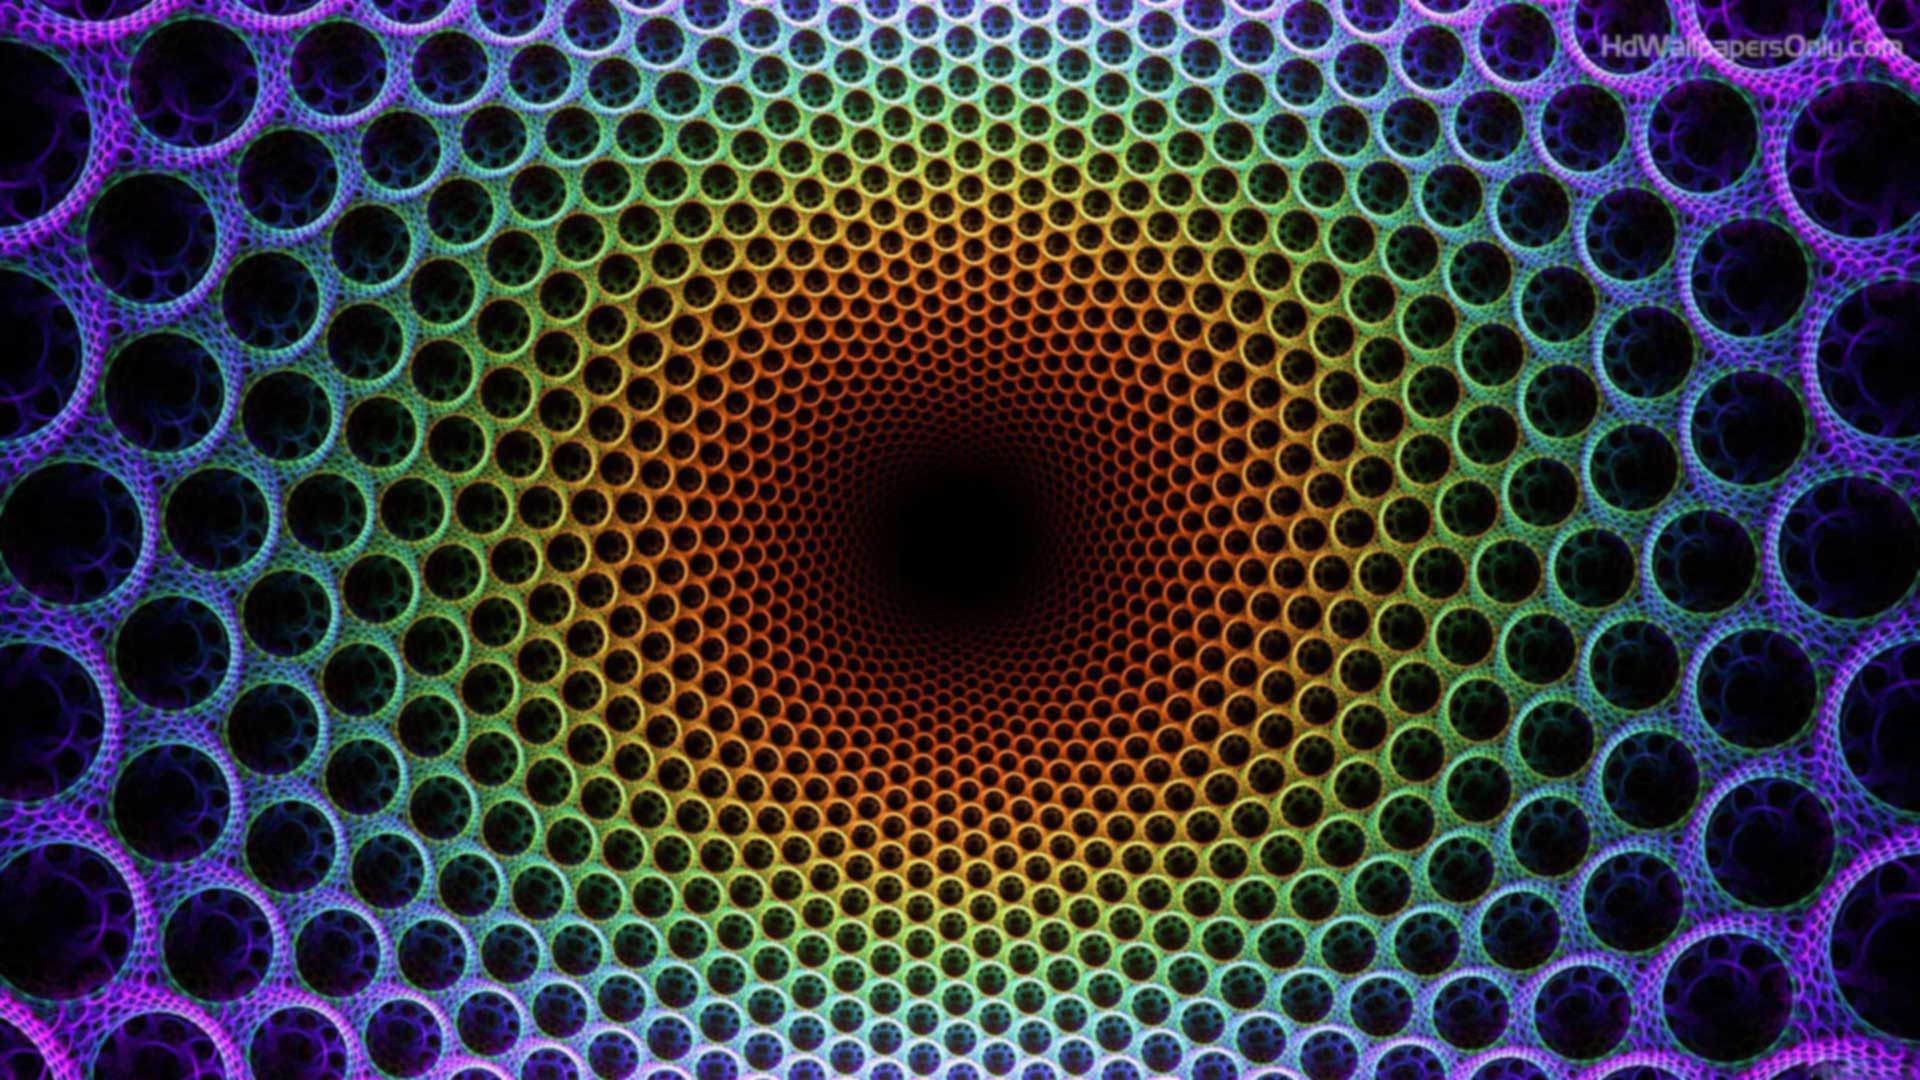 Moving Illusion HD Wallpaper Background Image